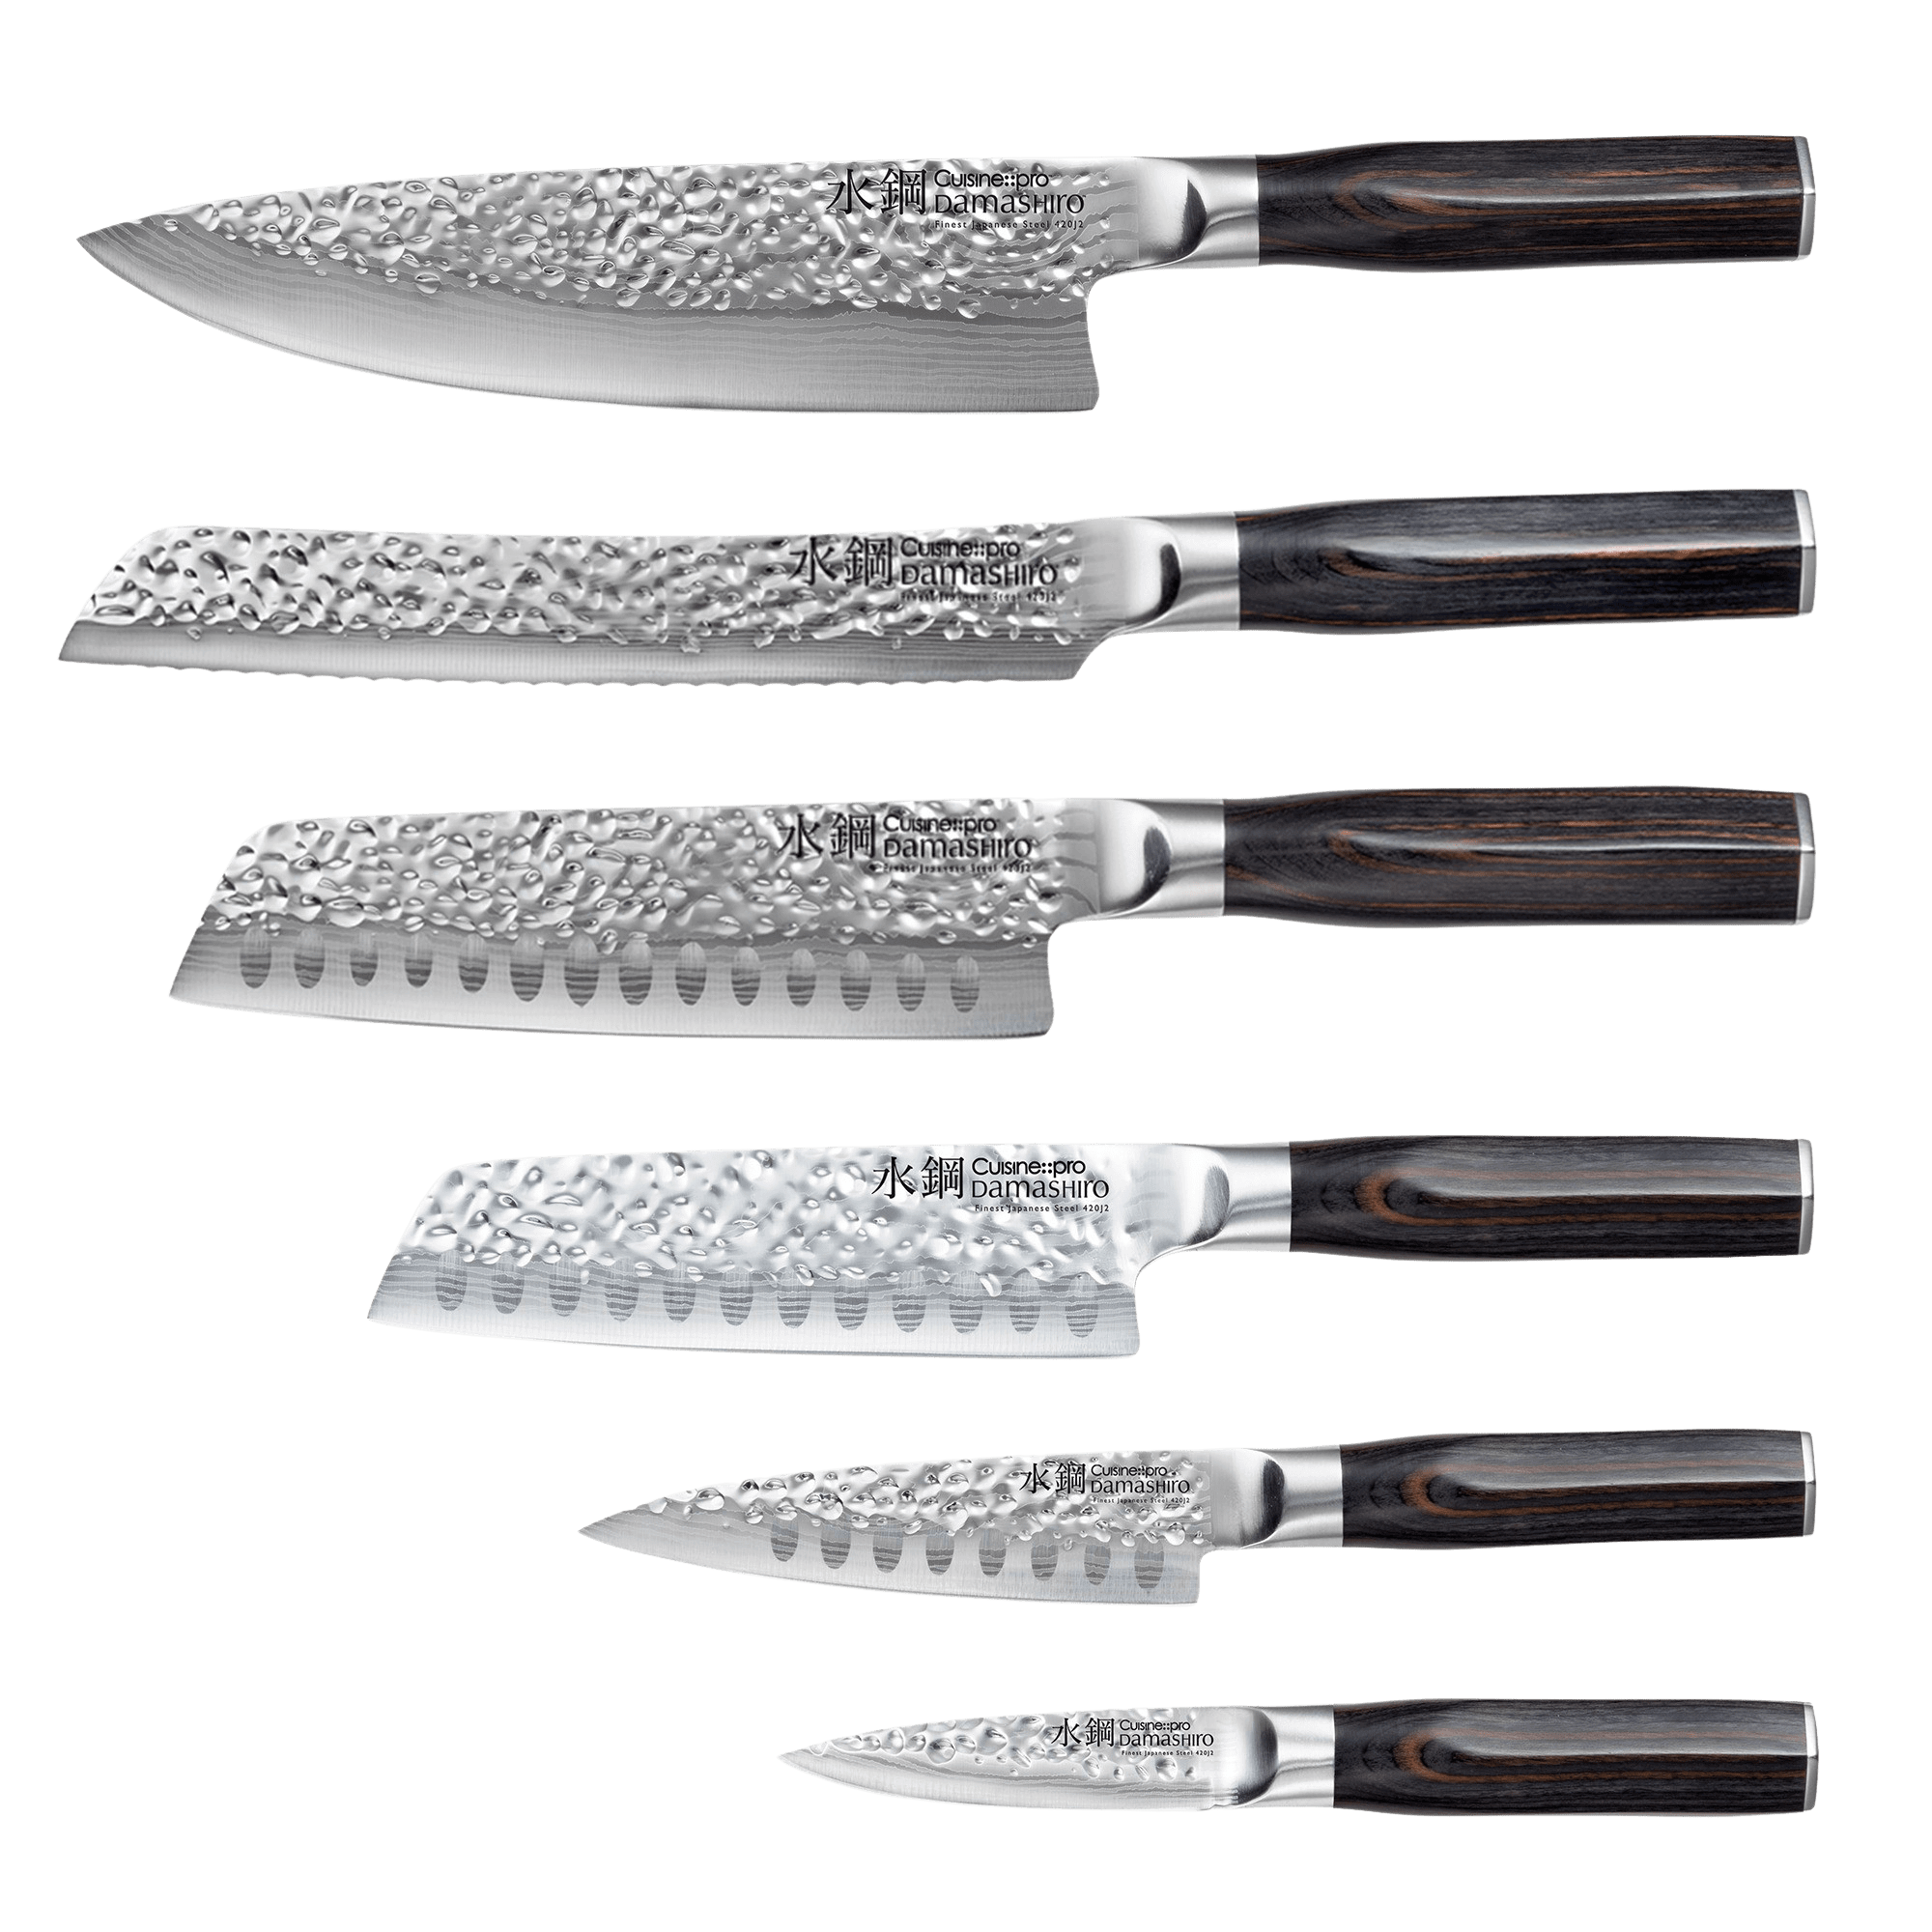 DFITO 9-Piece Kitchen Knife Set, Stainless Steel Professional Cutlery Knife  with Knife Sheaths, Ultra Sharp Kitchen Knives with Knife Storage Bag